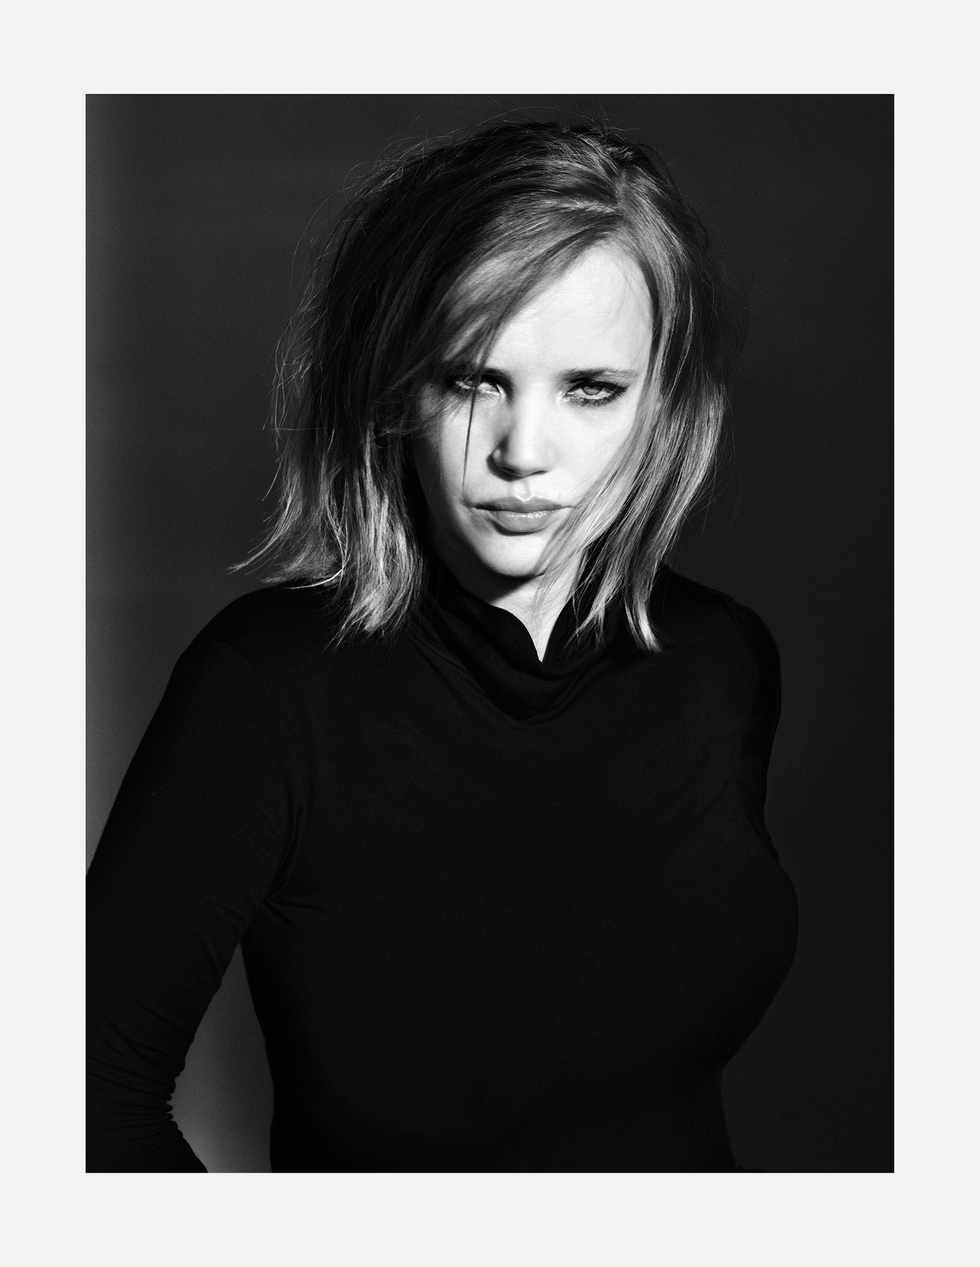 joanna kulig photographed for esquire, warsaw, february 2020